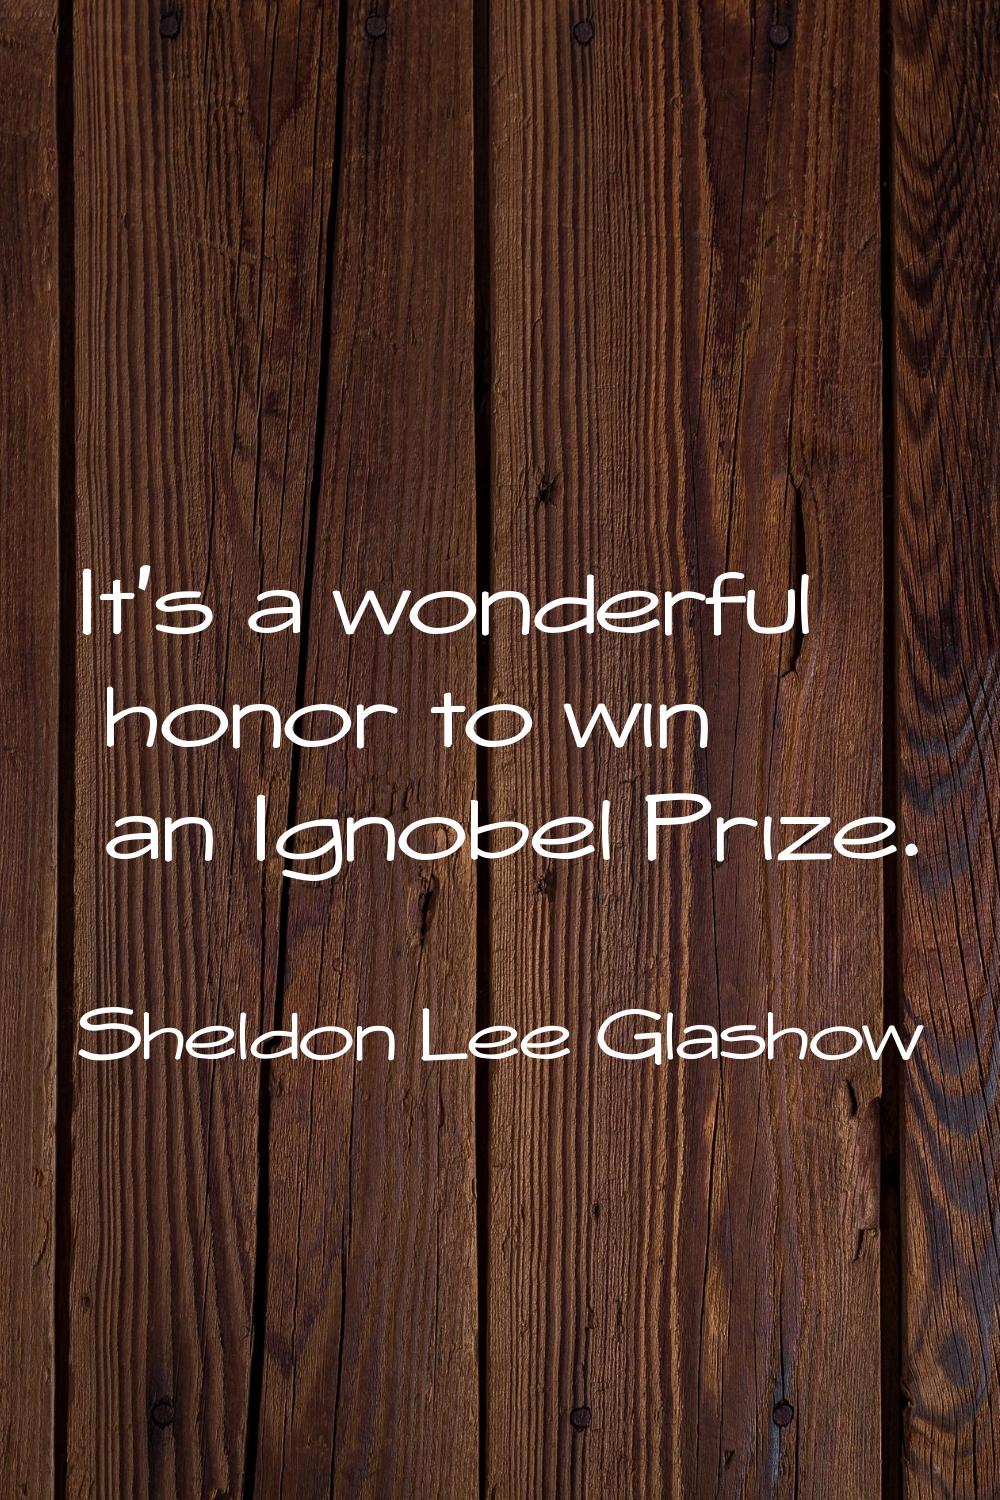 It's a wonderful honor to win an Ignobel Prize.